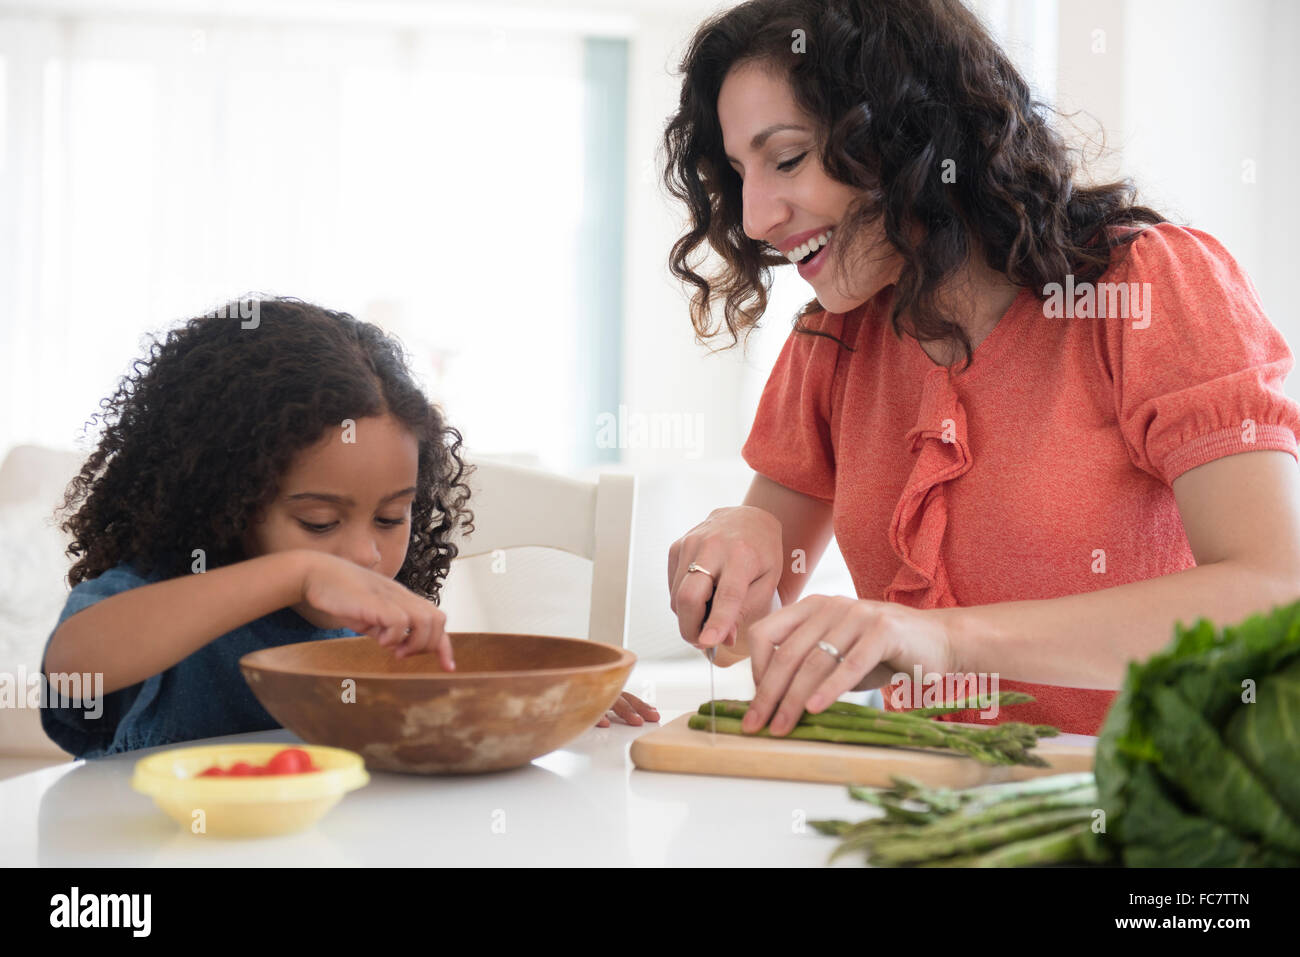 Mother and daughter chopping vegetables Stock Photo